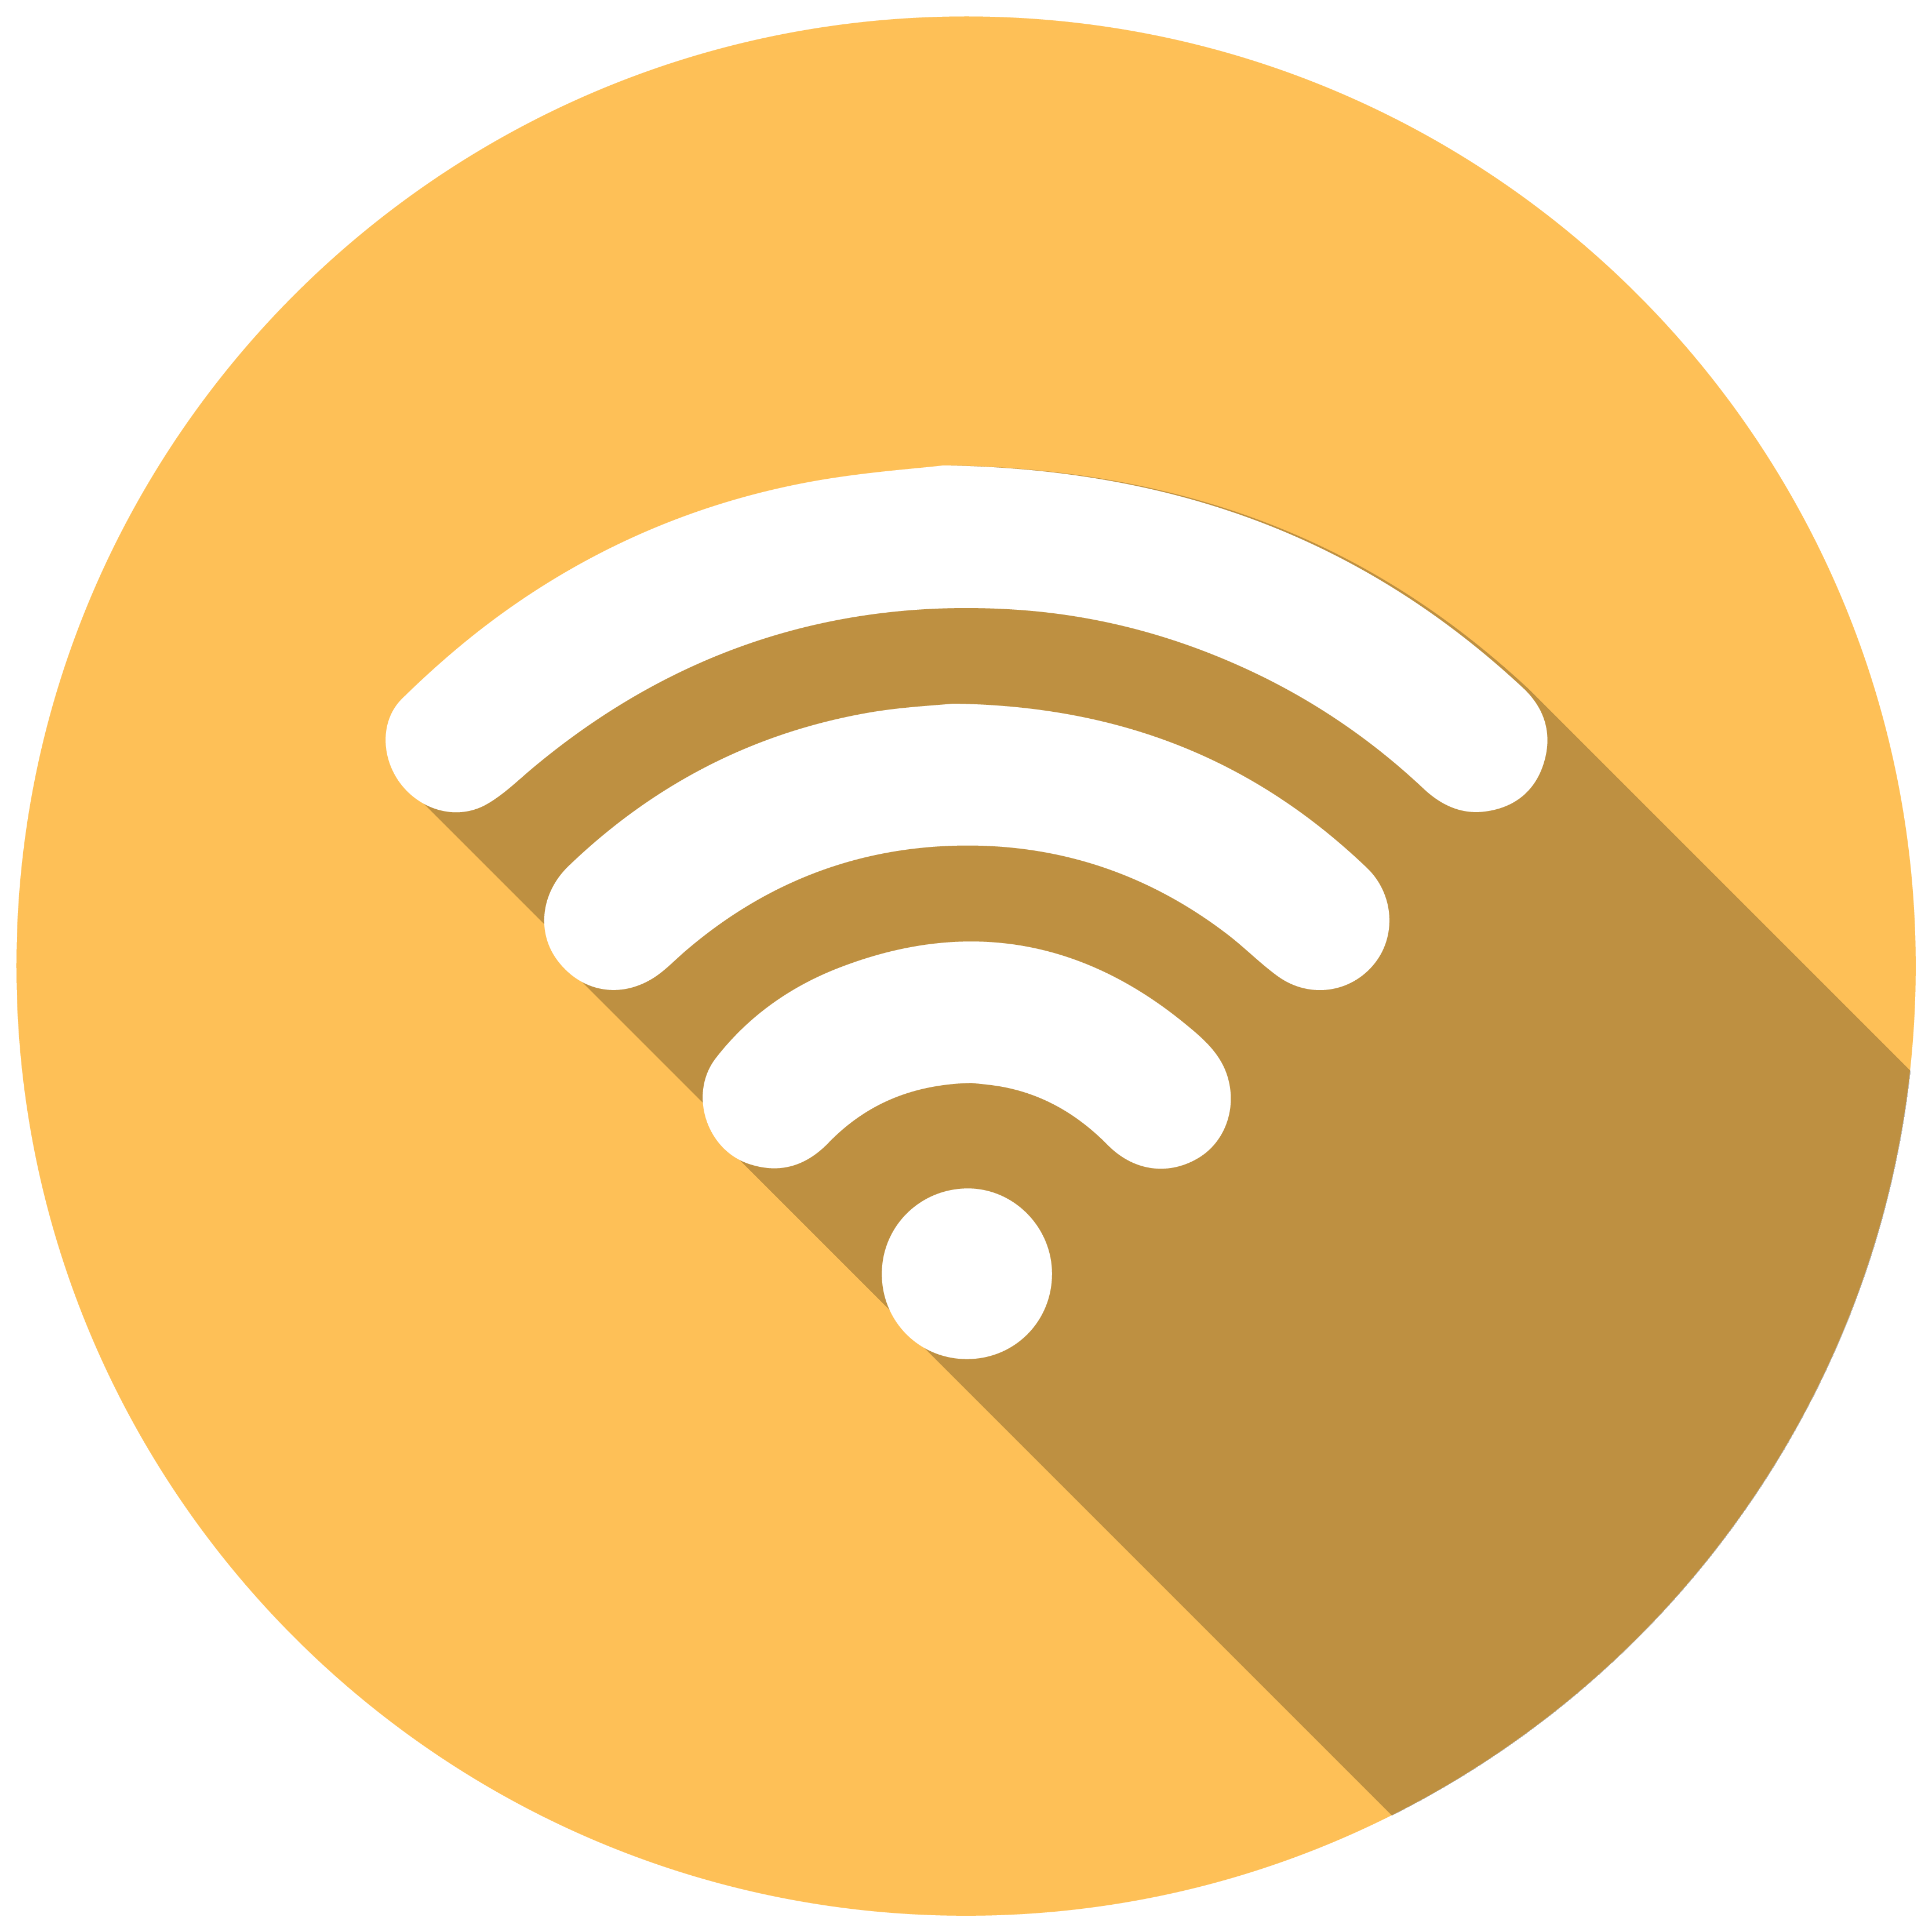 Direct Wifi Icon - Network  Communication Icons in SVG and PNG 